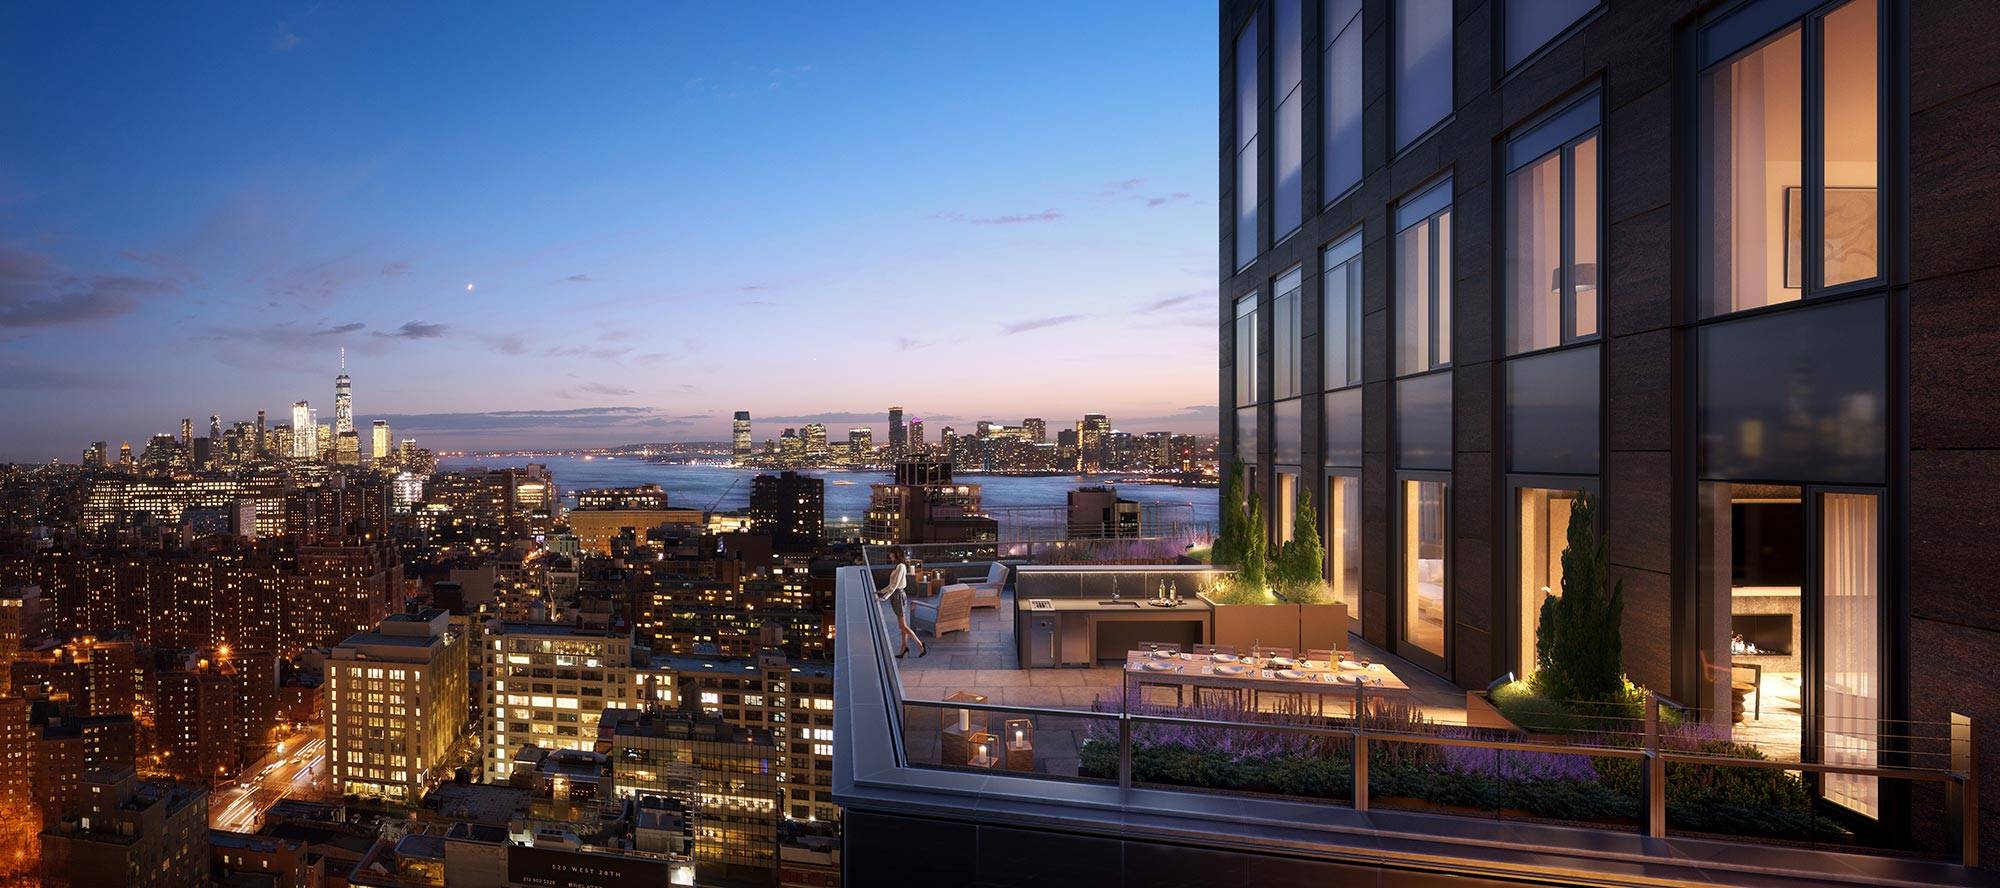 NO BROKERS FEE! GORGOUS 4 BEDROOM 3.5 BATHROOMS, LUXURY BUILDING, BOWLING ALLEY, POOL, SUN & BBQ TERRACE, EQUINOX FITNESS CENTER!! HUDSON YARDS!!!